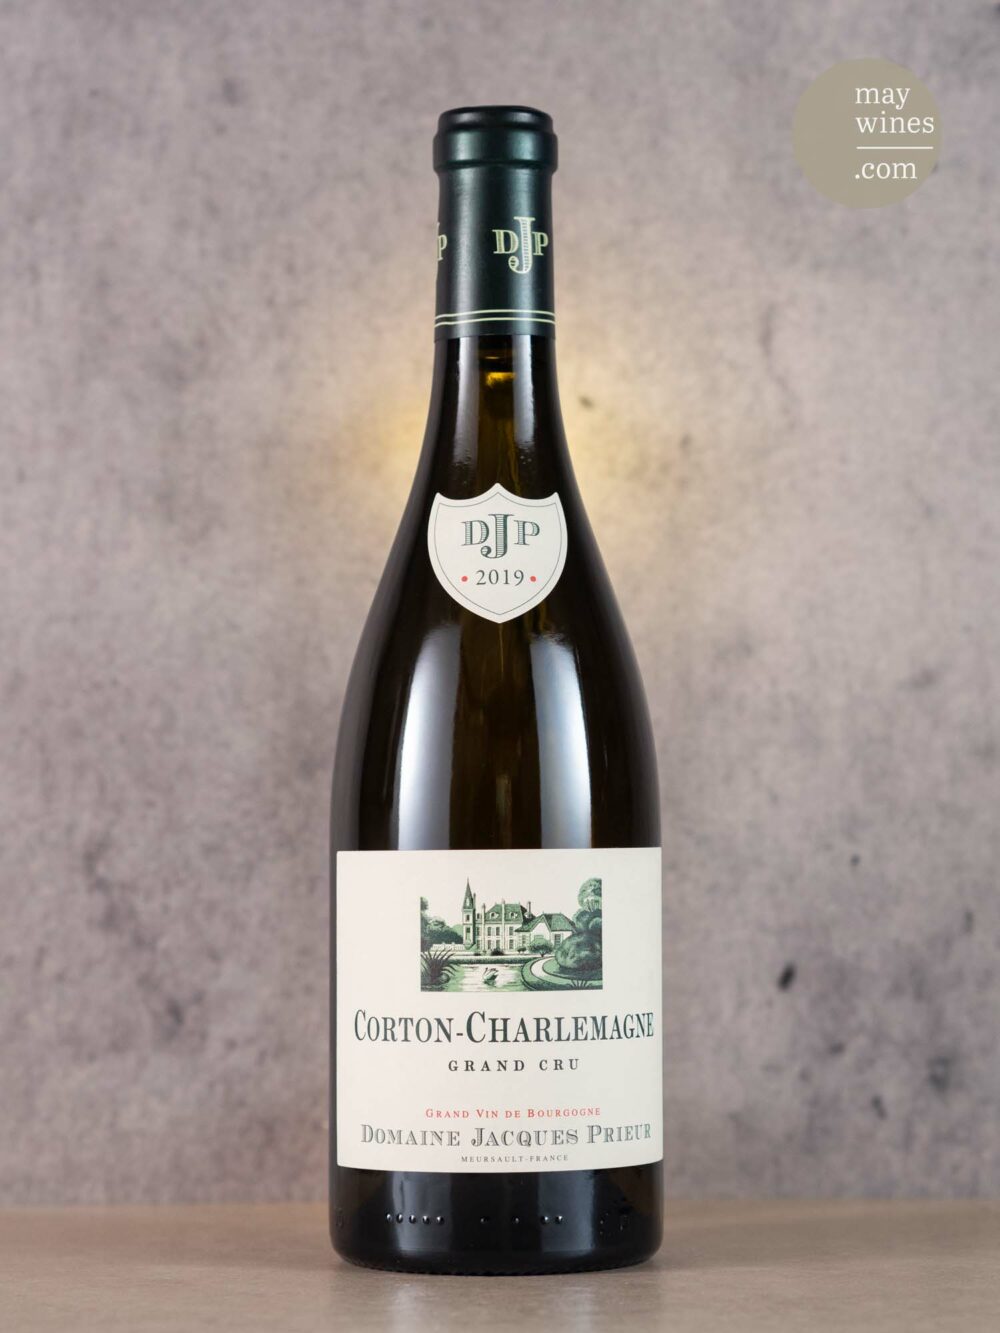 May Wines – Weißwein – 2019 Corton-Charlemagne Grand Cru - Domaine Jacques Prieur